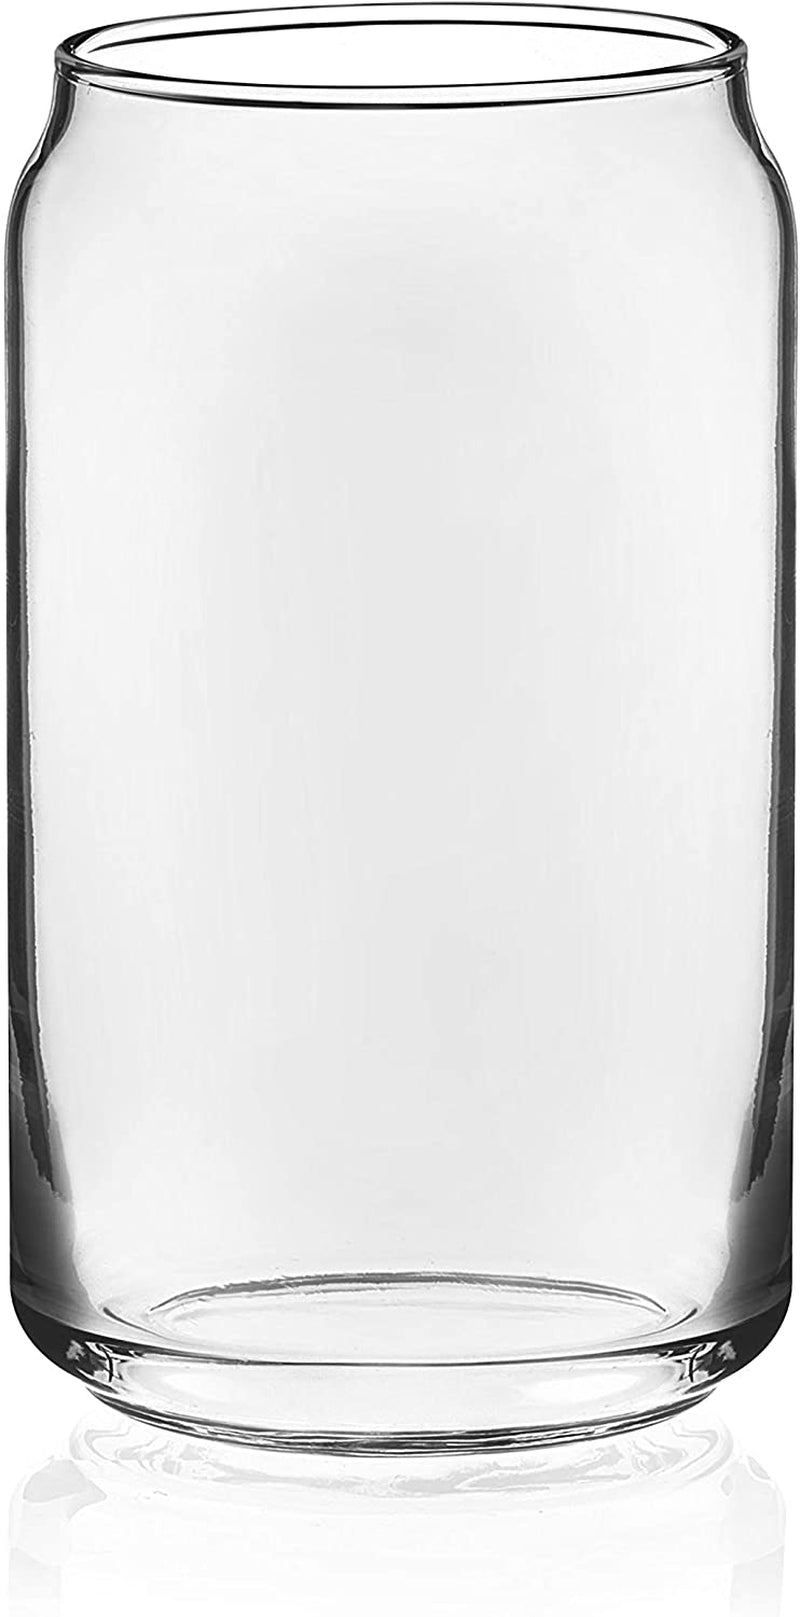 Libbey Classic Can Tumbler Glasses, Set of 4 Home & Garden > Kitchen & Dining > Tableware > Drinkware Libbey   